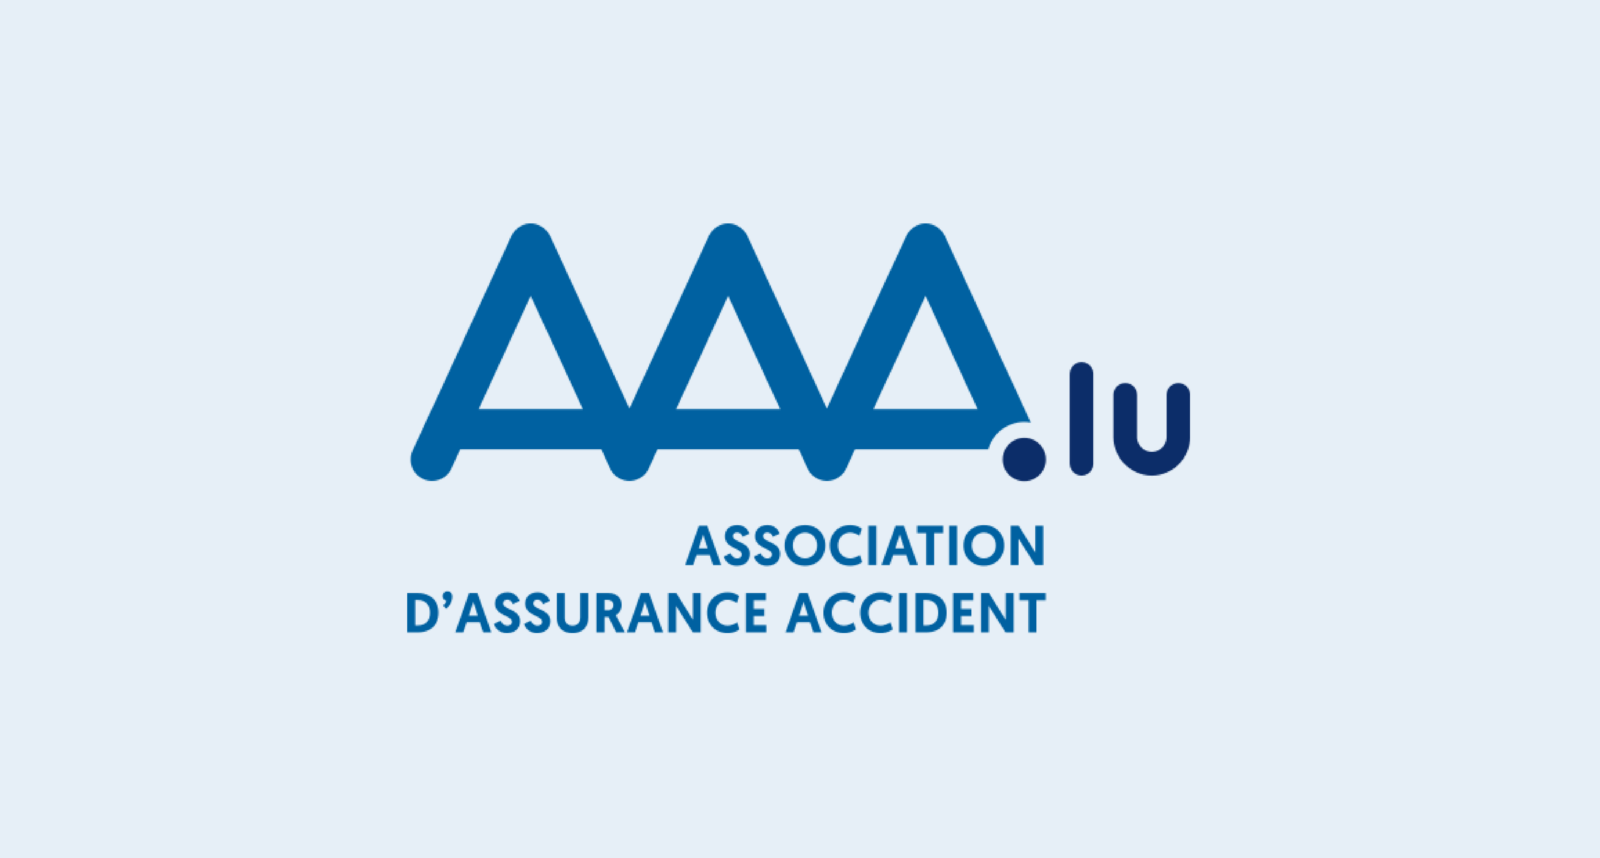 Accident insurance association in Luxembourg